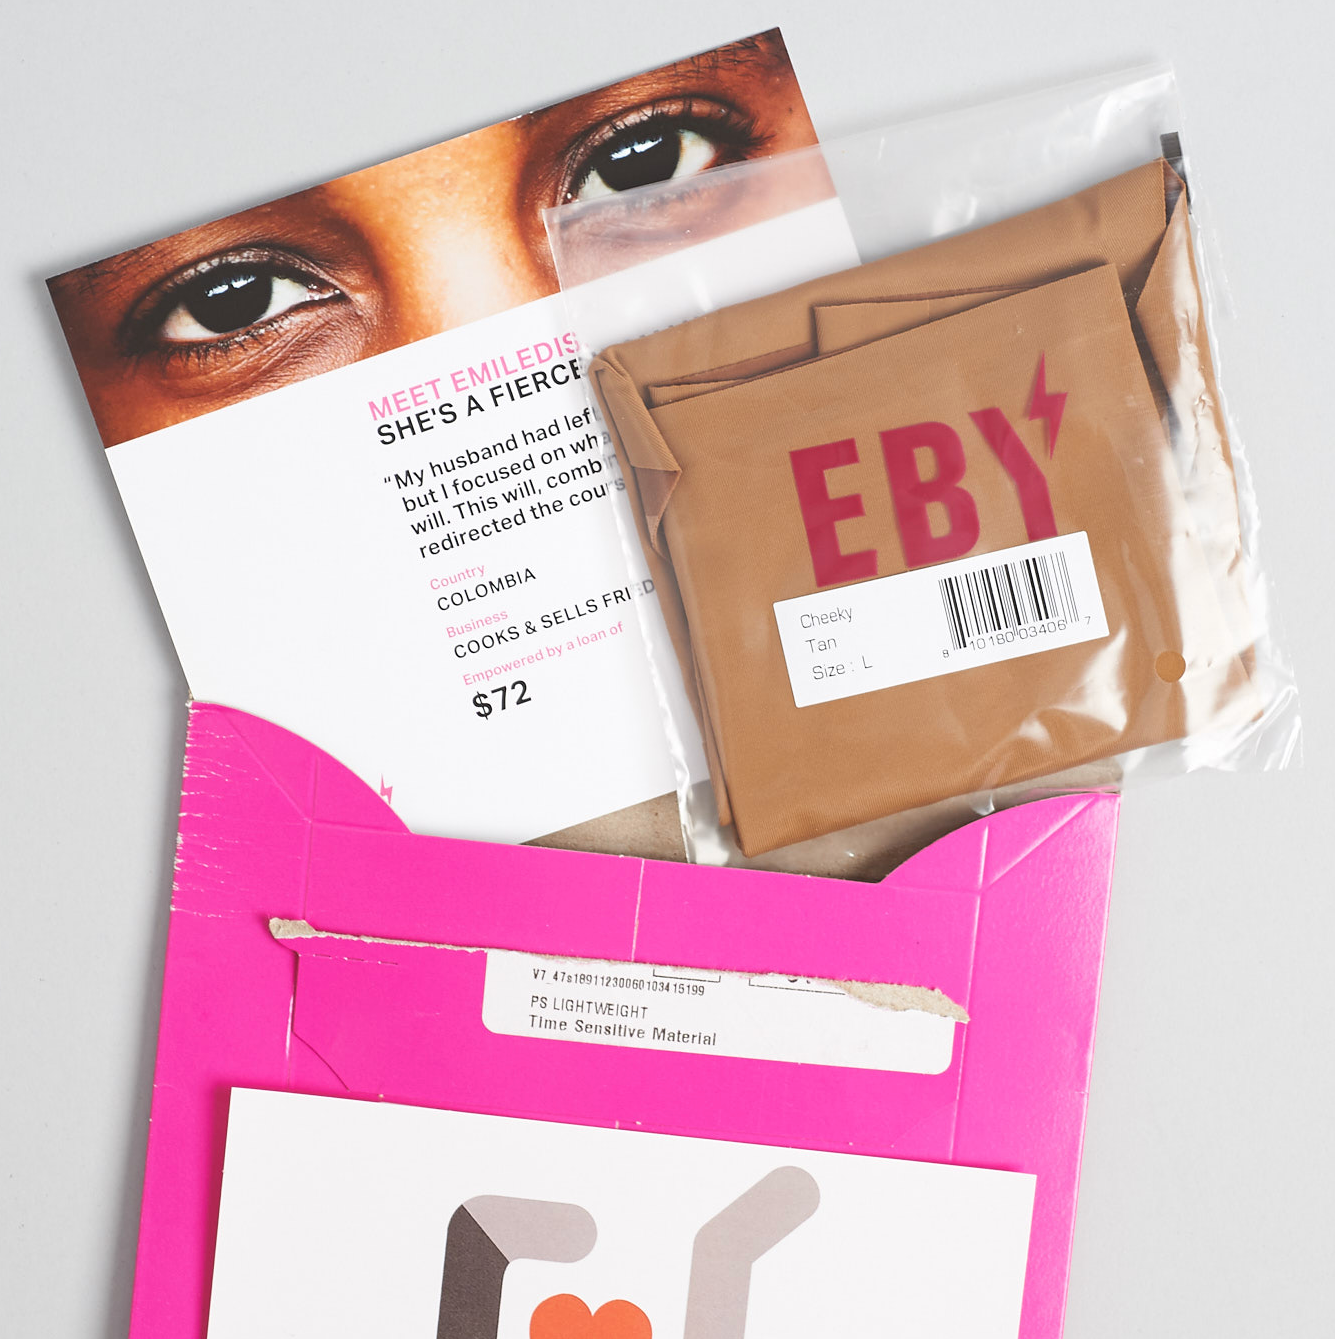 EBY Black Friday Deal – Up to 57% Off Limited Edition Packs + 30% Off Sitewide!